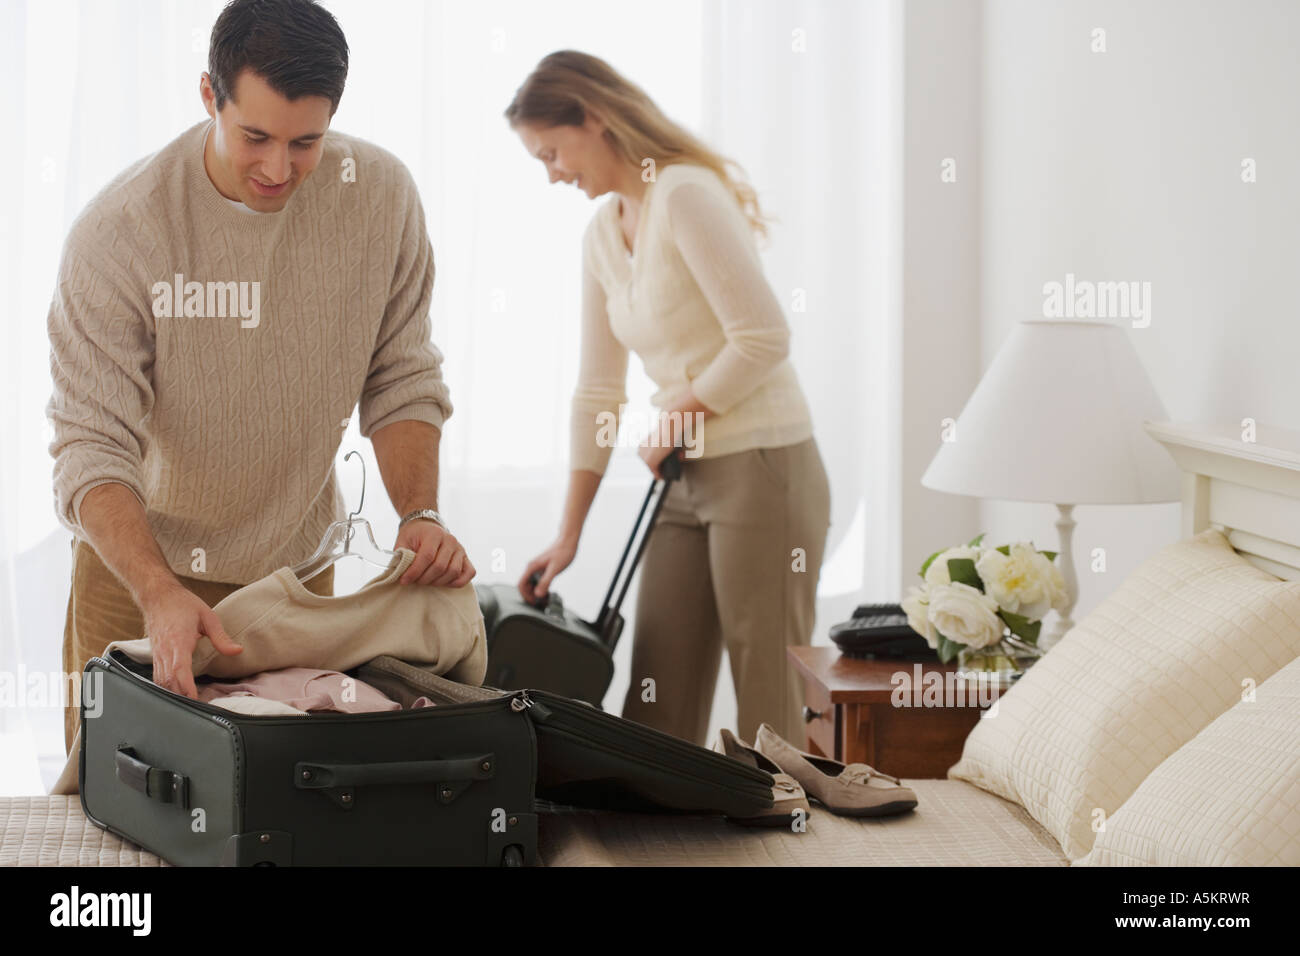 Couple unpacking in hotel room Stock Photo